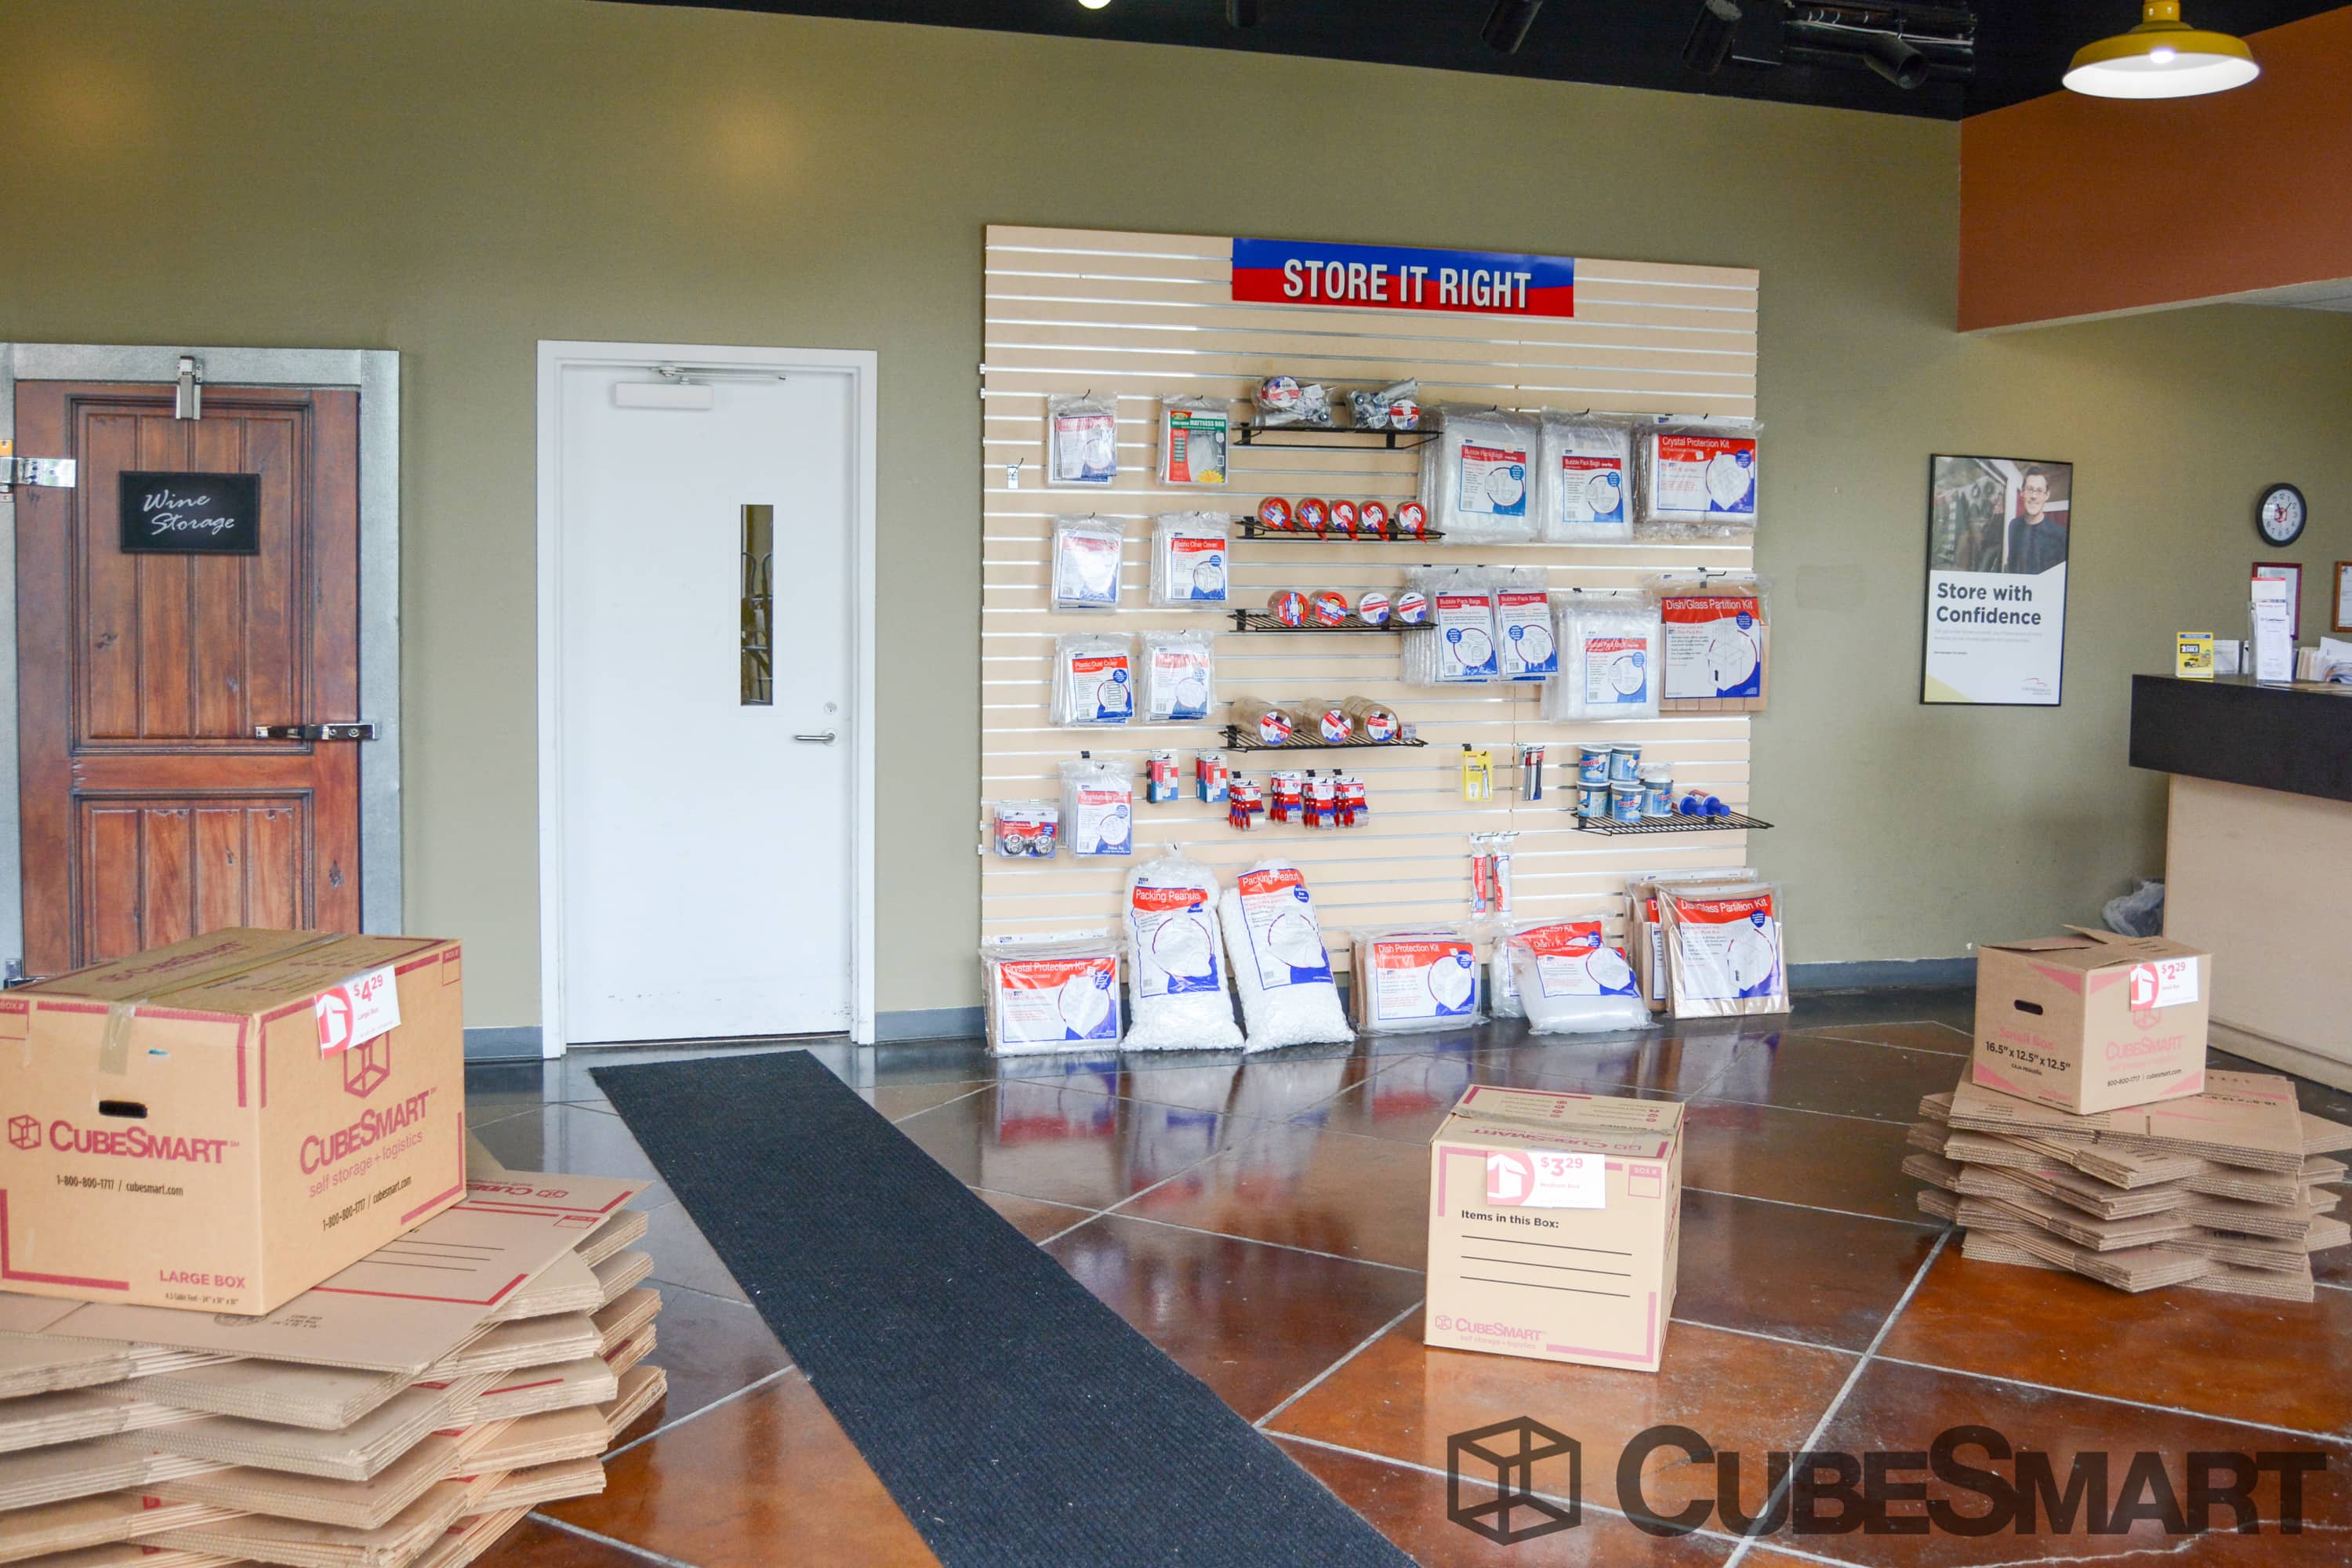 CubeSmart Self Storage - Countryside, US, climate controlled self storage